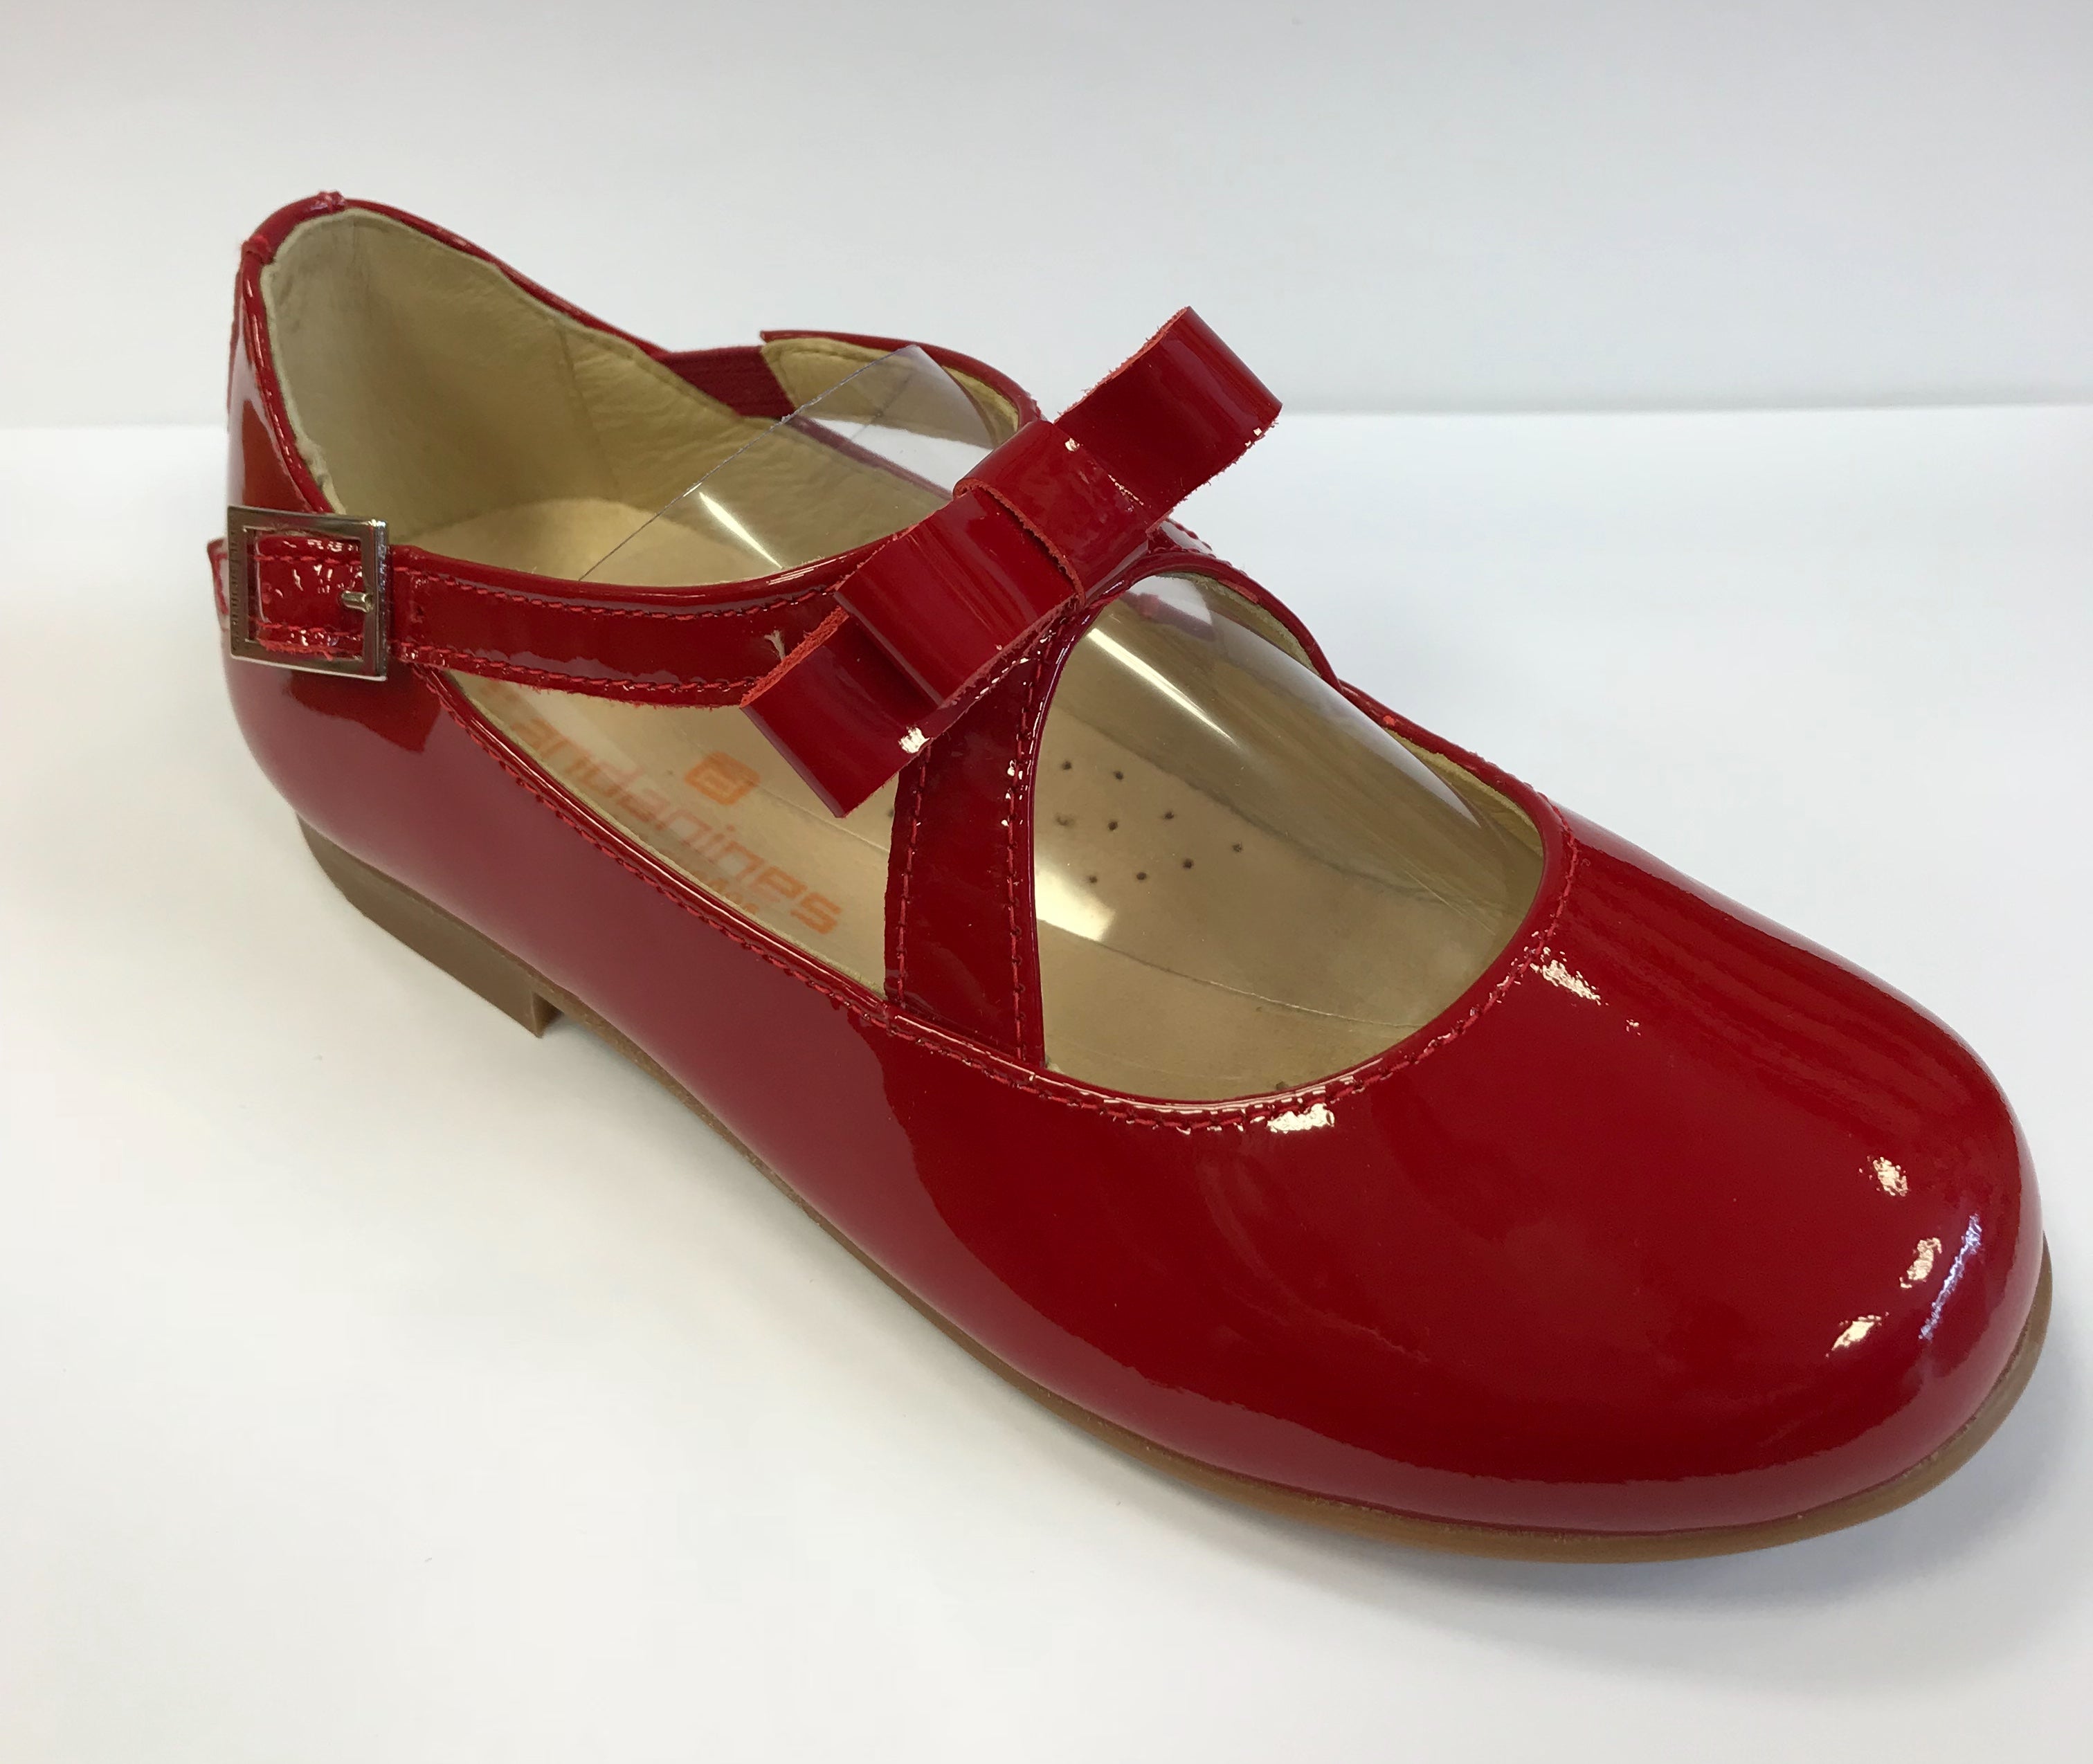 red mary jane shoes kids